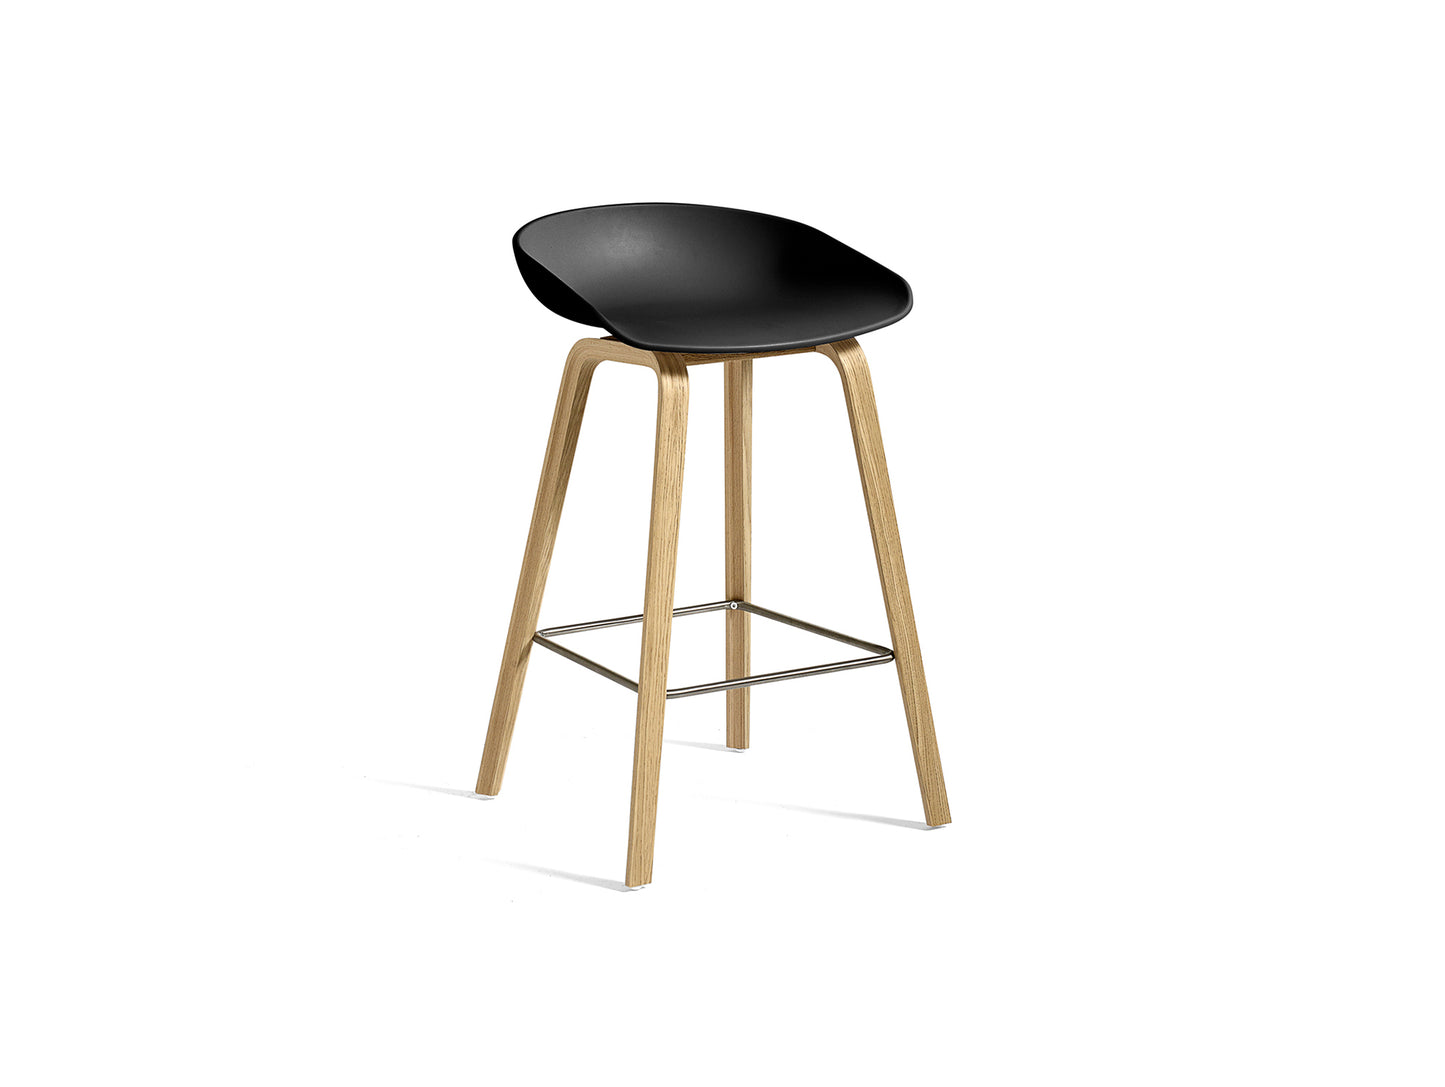 About A Stool AAS 32 by HAY - H 65cm /  Black Shell / Lacquered Oak Base